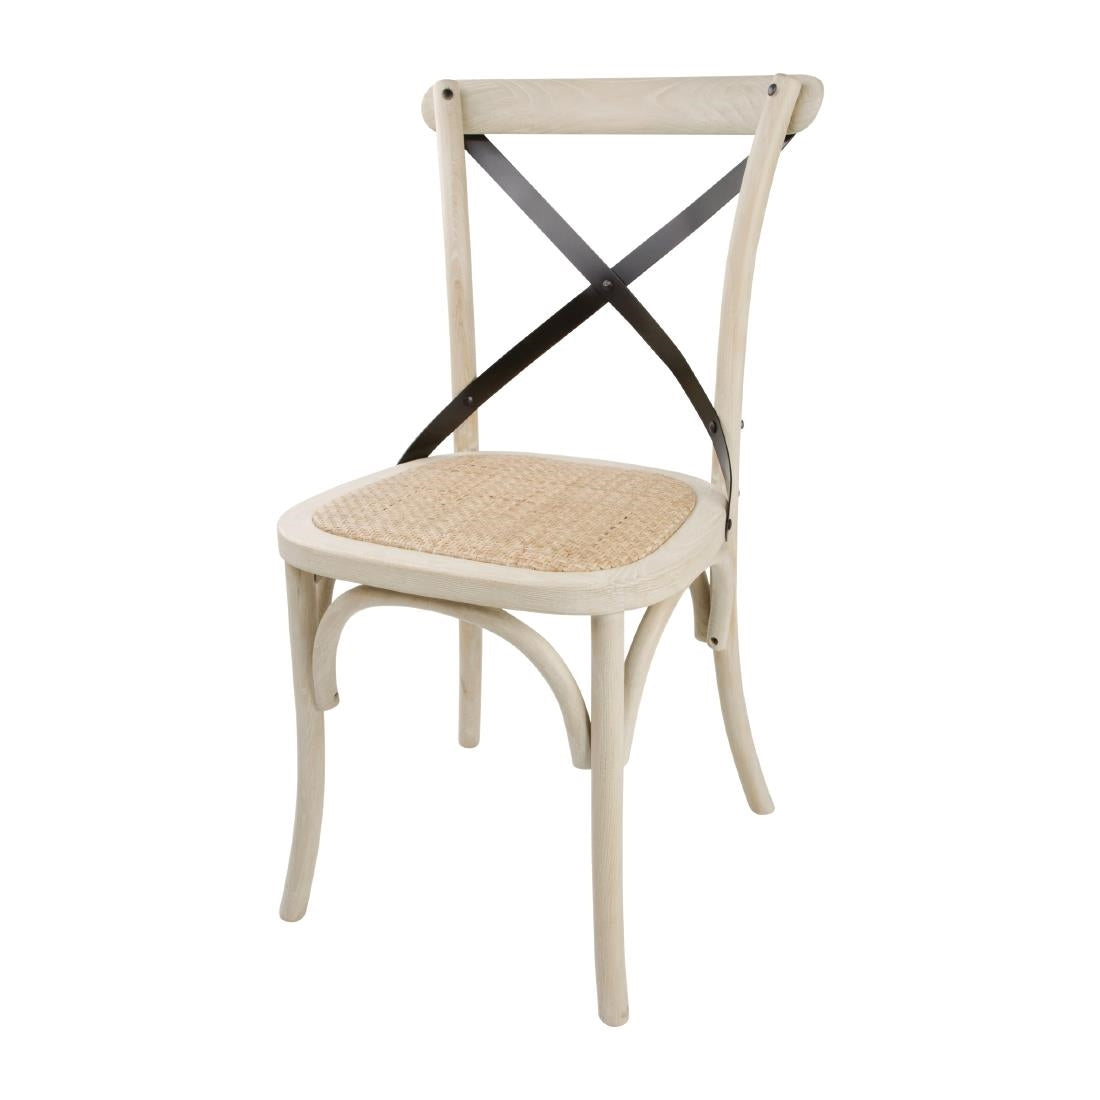 Bolero Bentwood Chairs with Metal Cross Backrest (Pack of 2) JD Catering Equipment Solutions Ltd